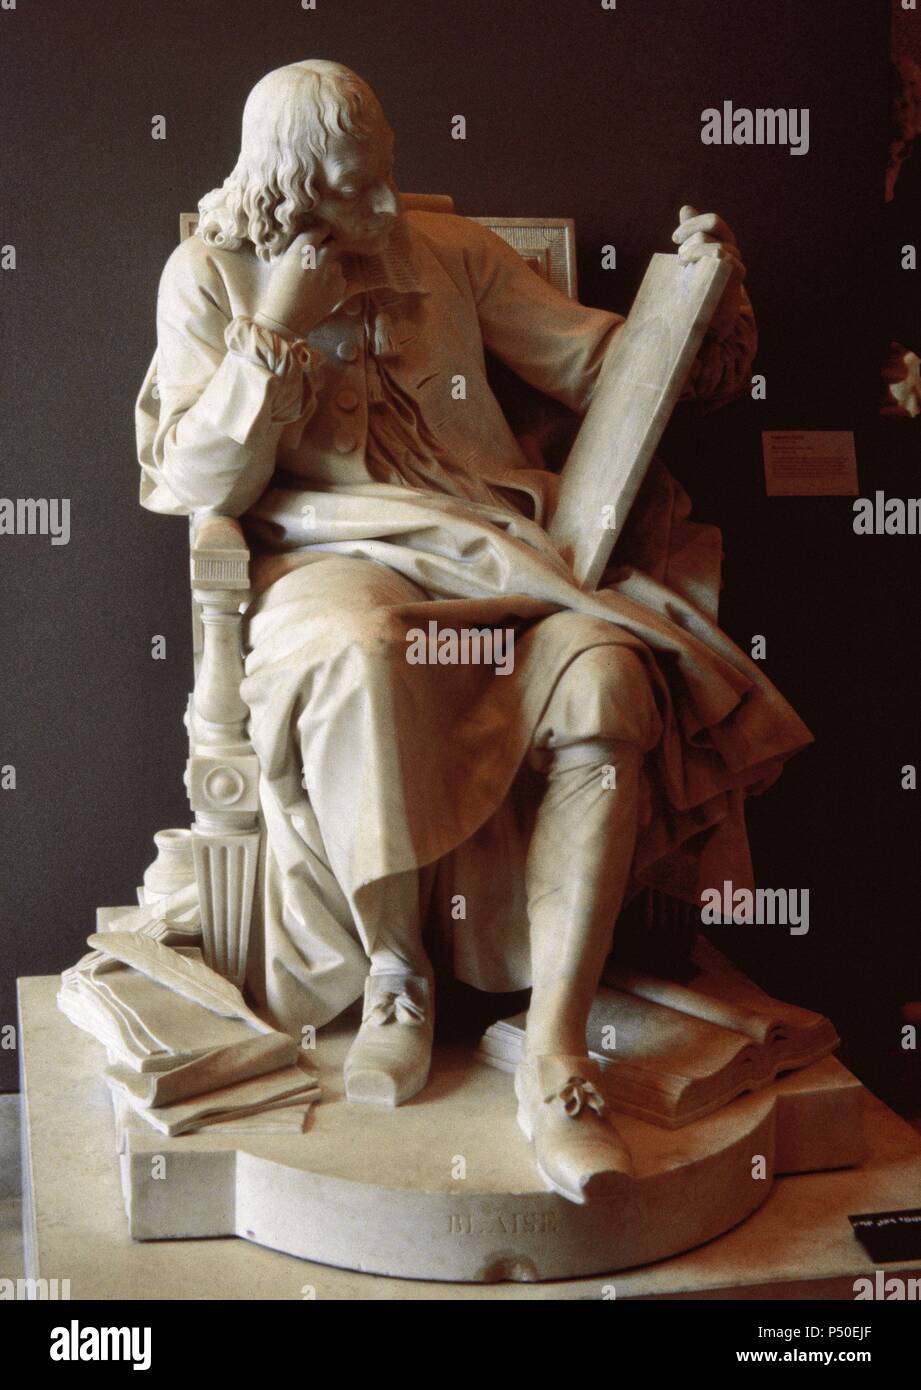 Blaise Pascal (1623-1662). French mathematician, physicist and philosopher. Pascal studying  the cycloid (1785). Sculpture by Augustin Pajou. Louvre Museum. Paris. France. Stock Photo